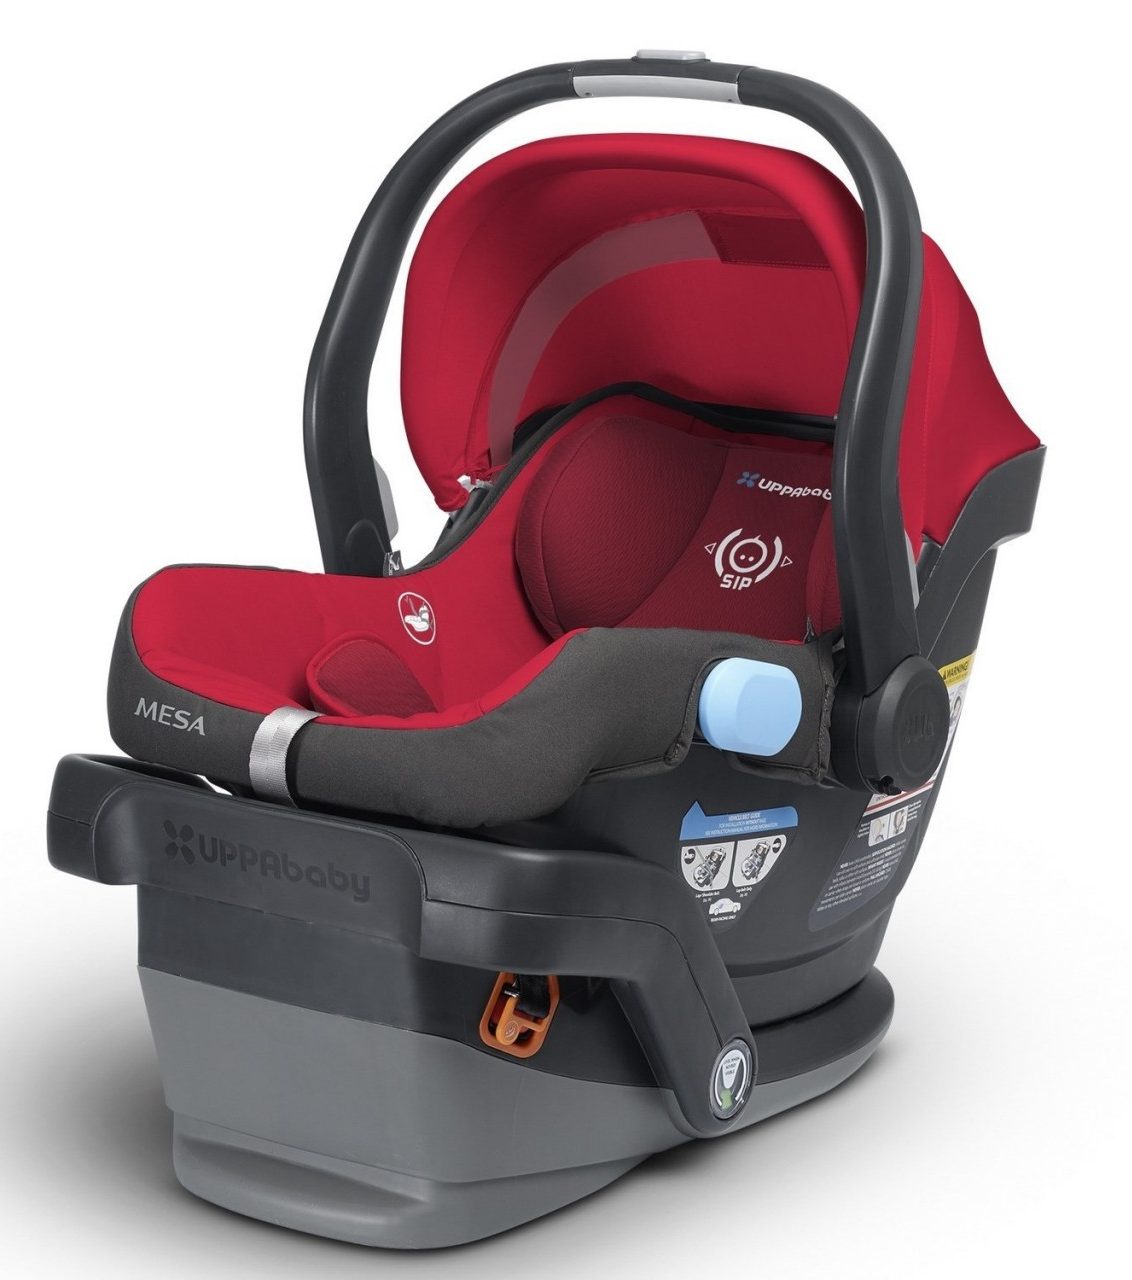 2020 UPPAbaby MESA Review On the Up and Up with the UPPAbaby MESA